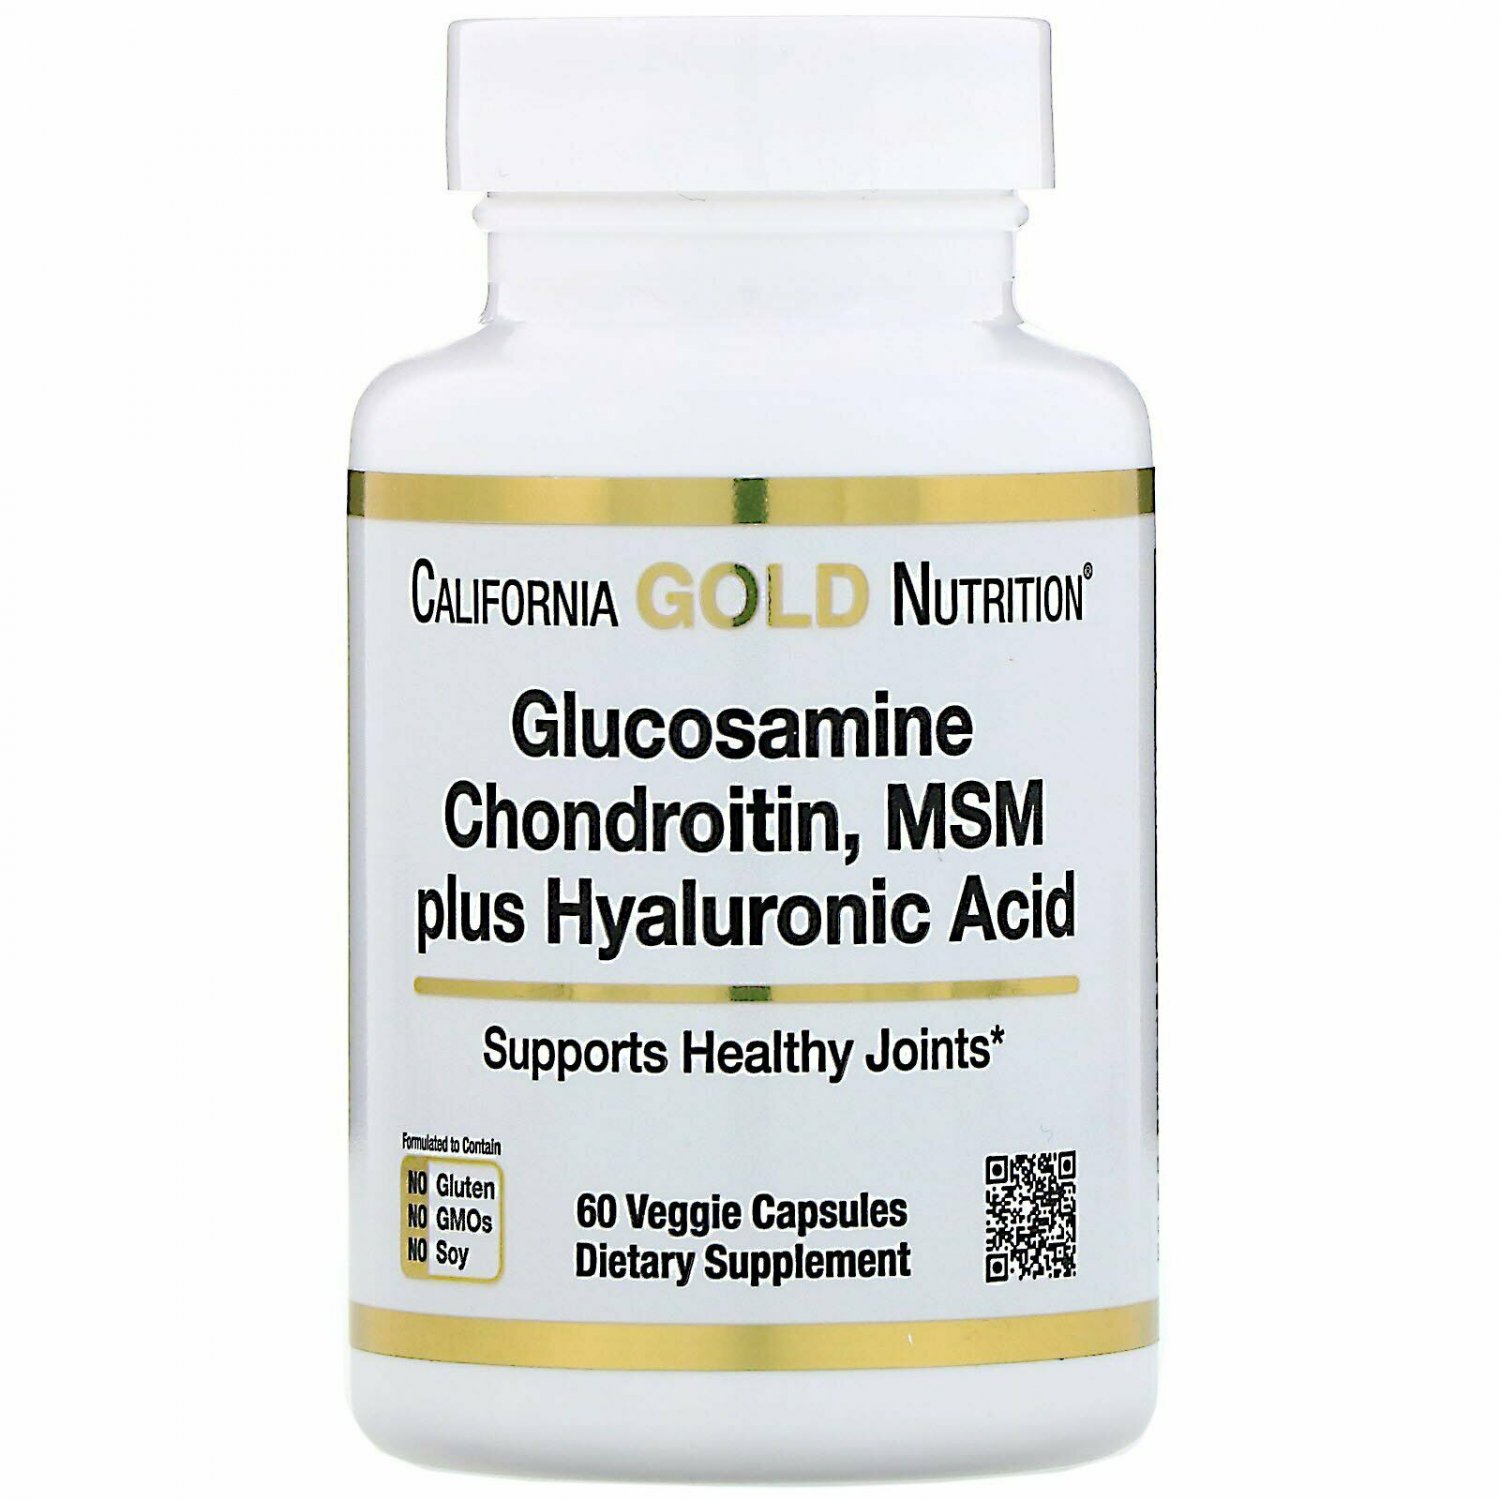 Glucosamine Chondroitin Msm Plus Hyaluronic Acid 60 Veggie Capsules By California Gold Nutrition